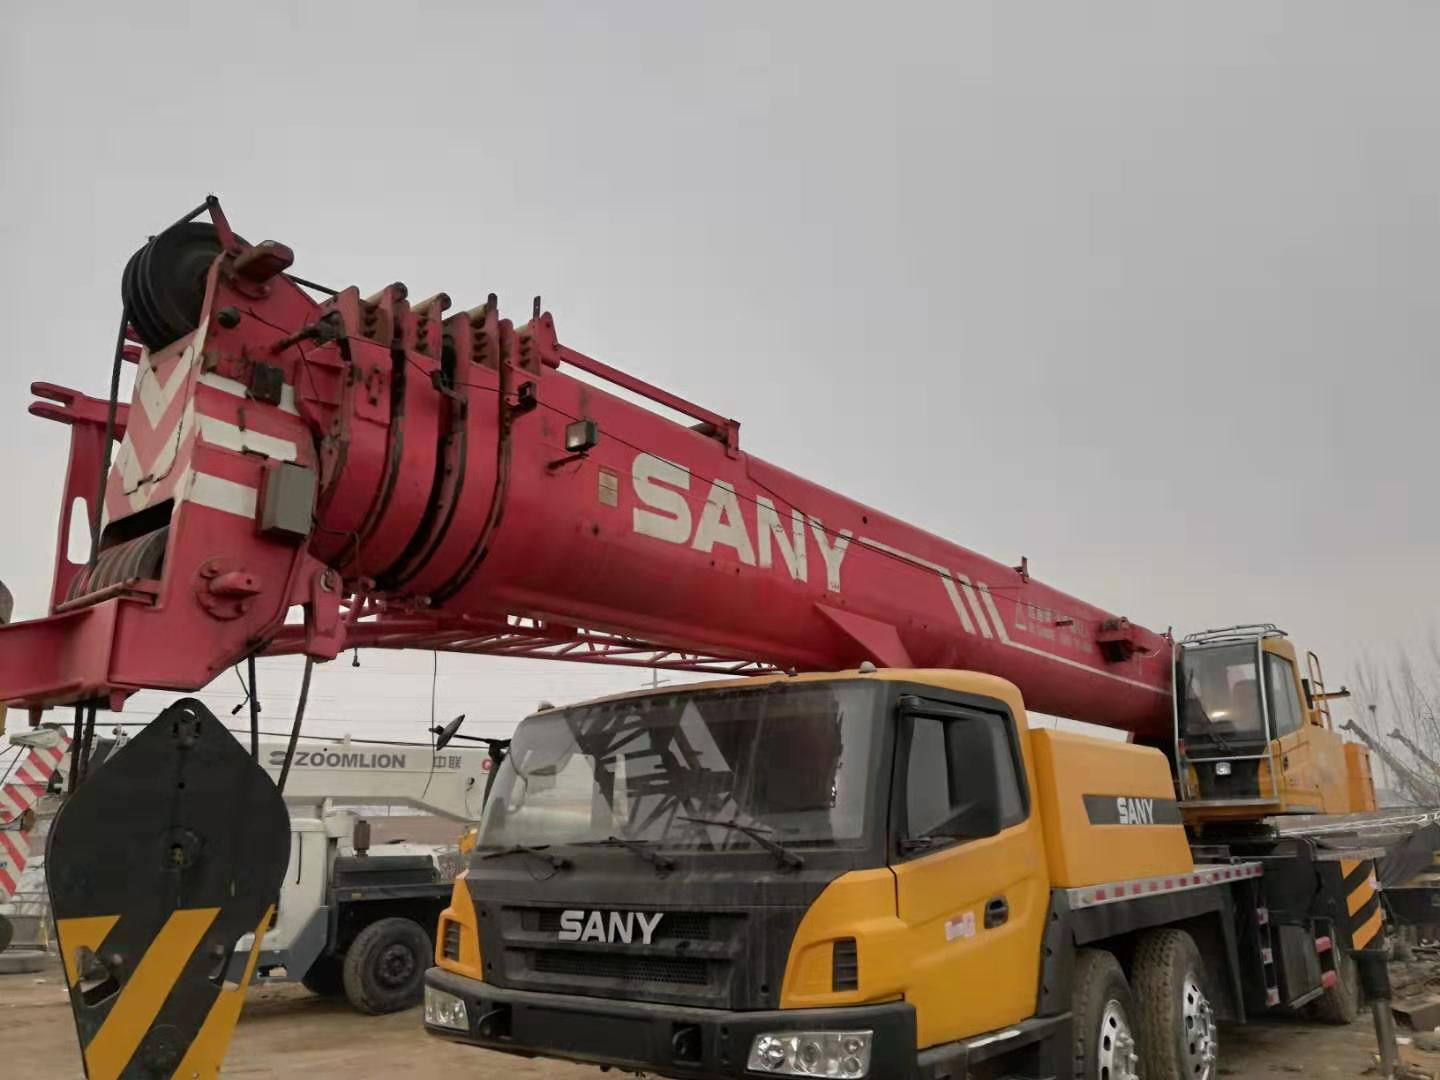 SANY STC1000 100 Ton Truck Crane made in china